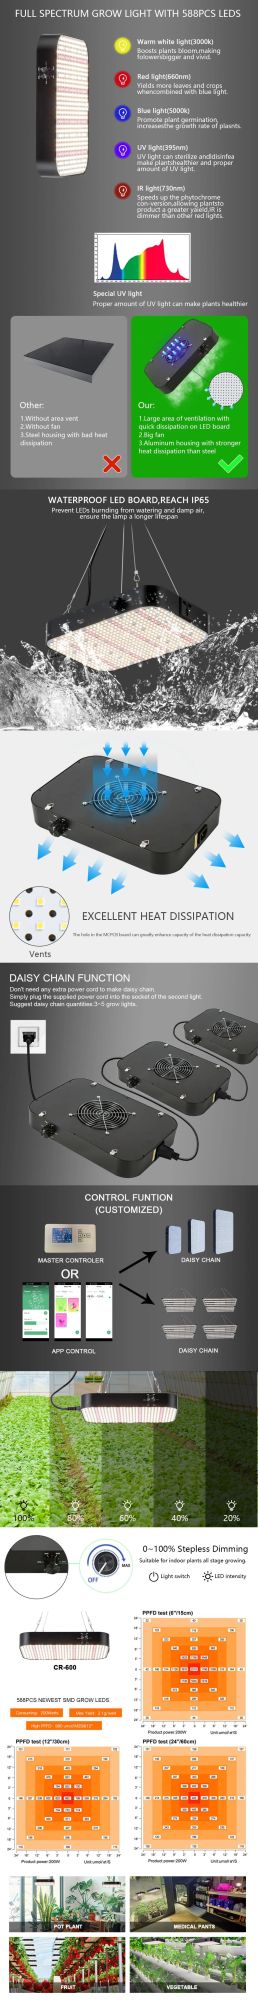 Full Spectrum High Power Adjustable LED Panel Tri-Proof High Bay Grow Light with CE RoHS FCC